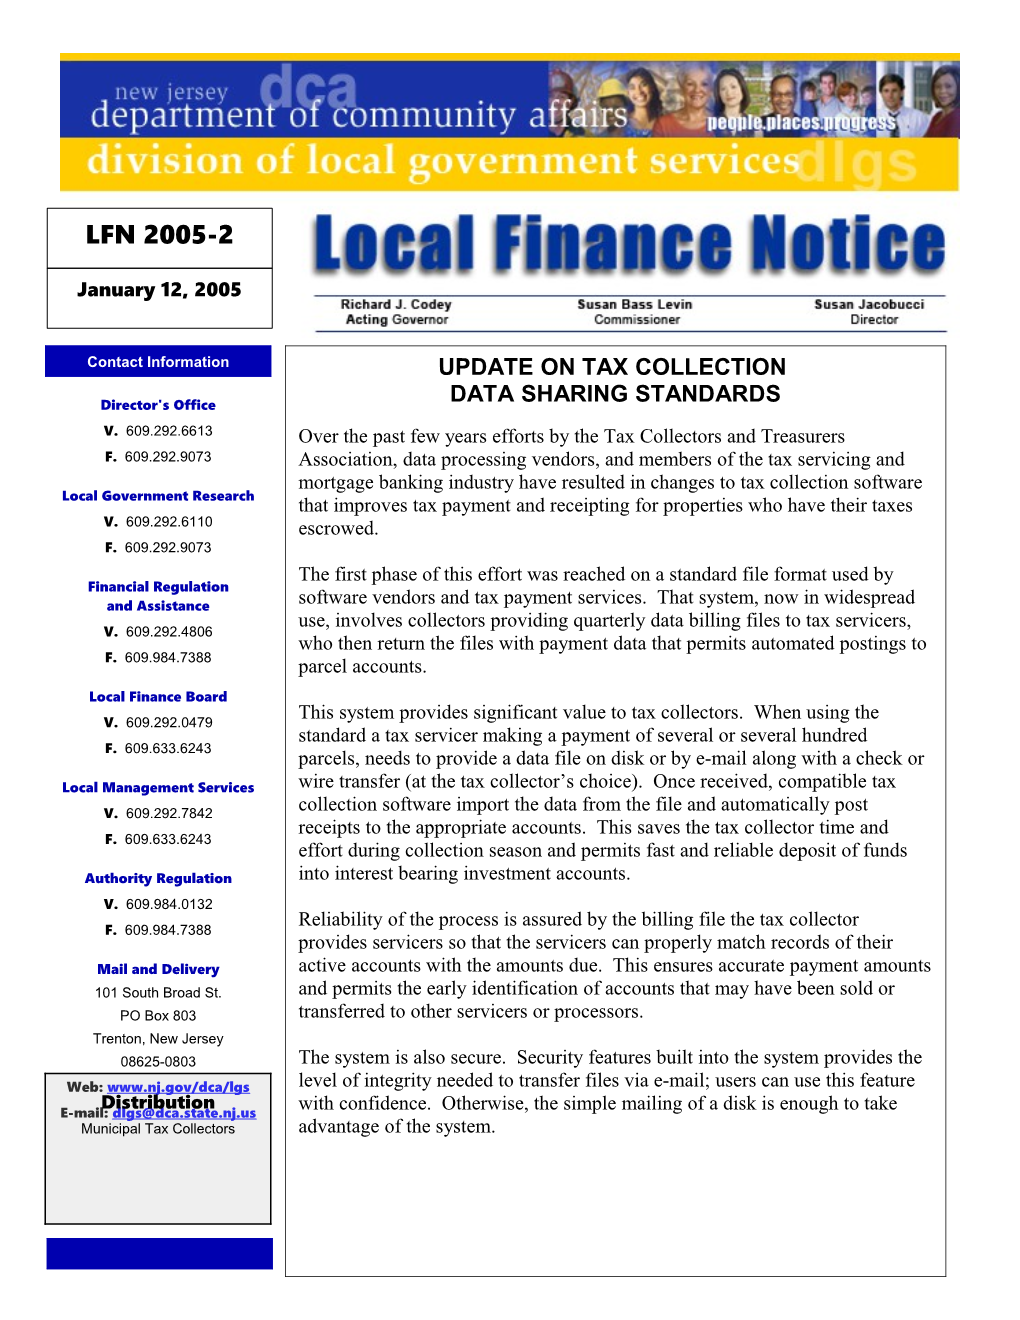 Local Finance Notice 2005-2January 12, 2005Page # 2